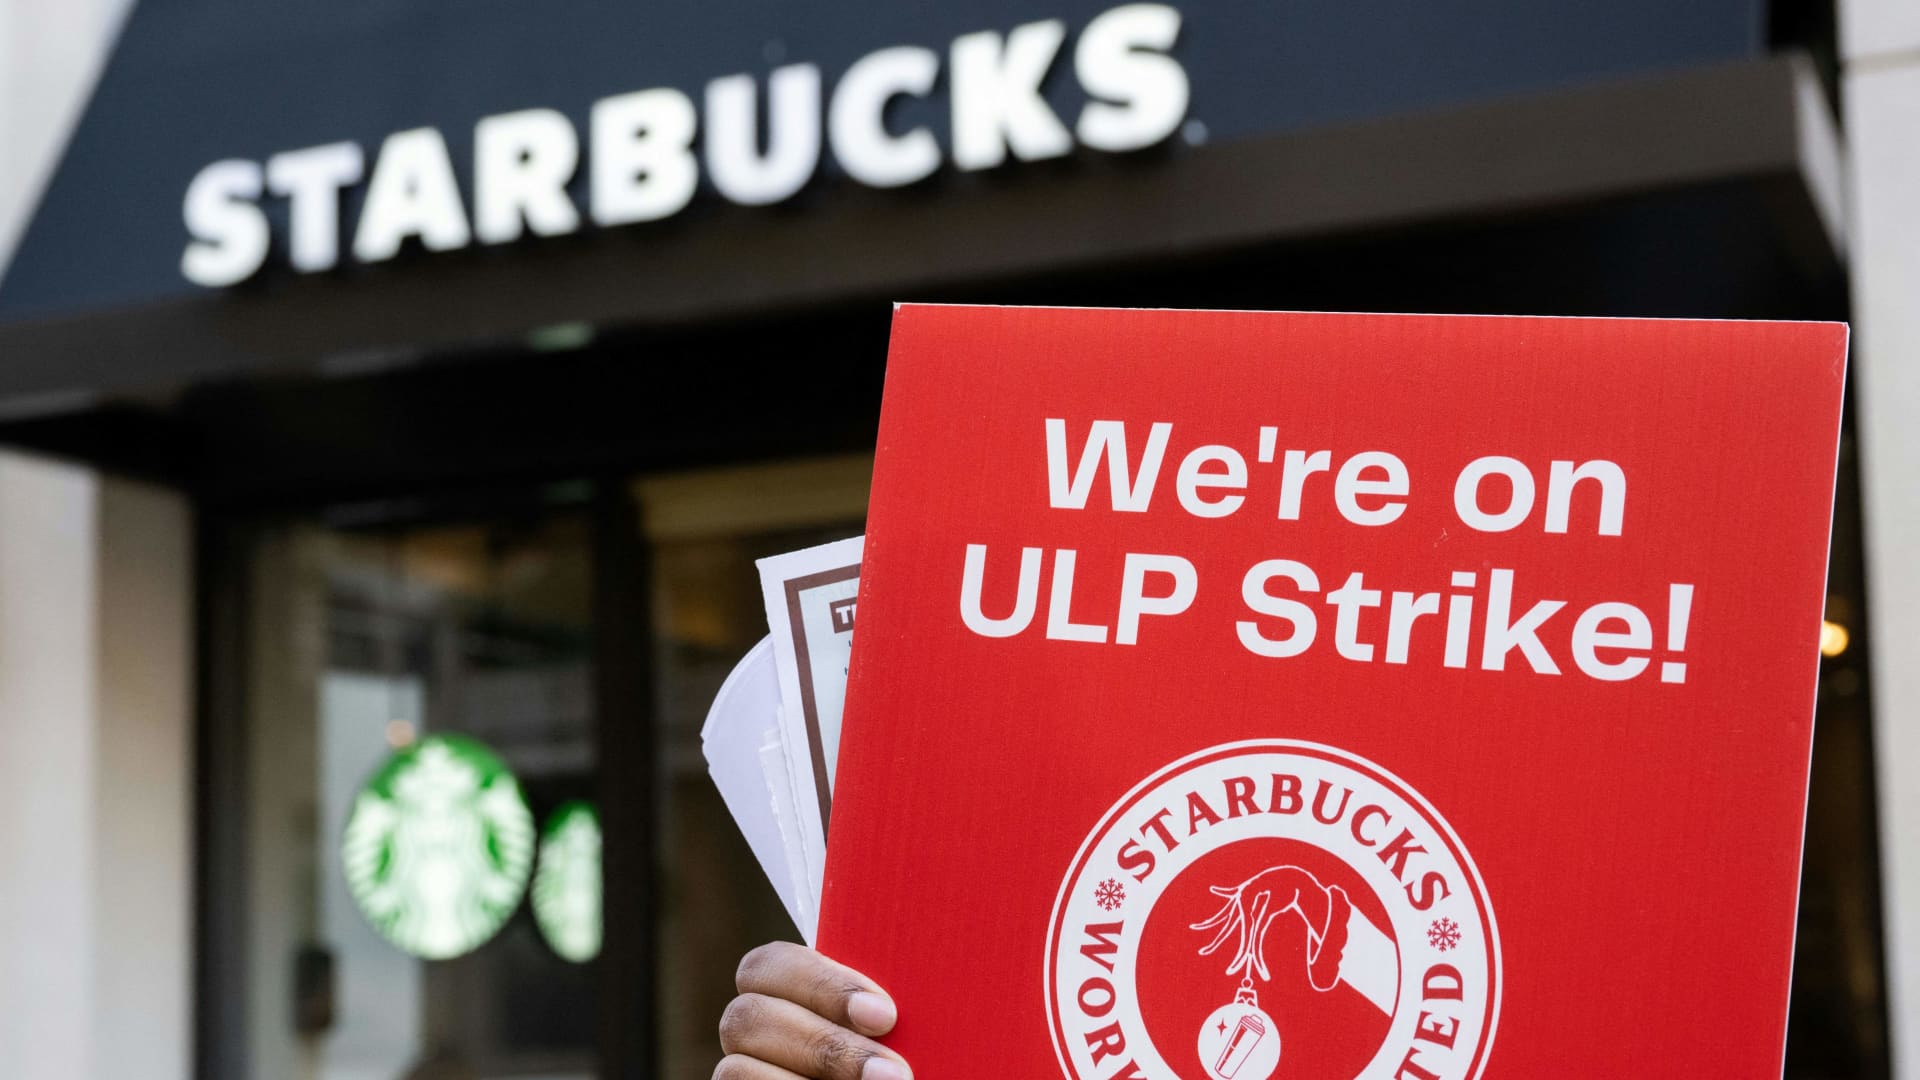 Labor coalition accuses Starbucks of 'flawed' union strategy, risking shareholder value